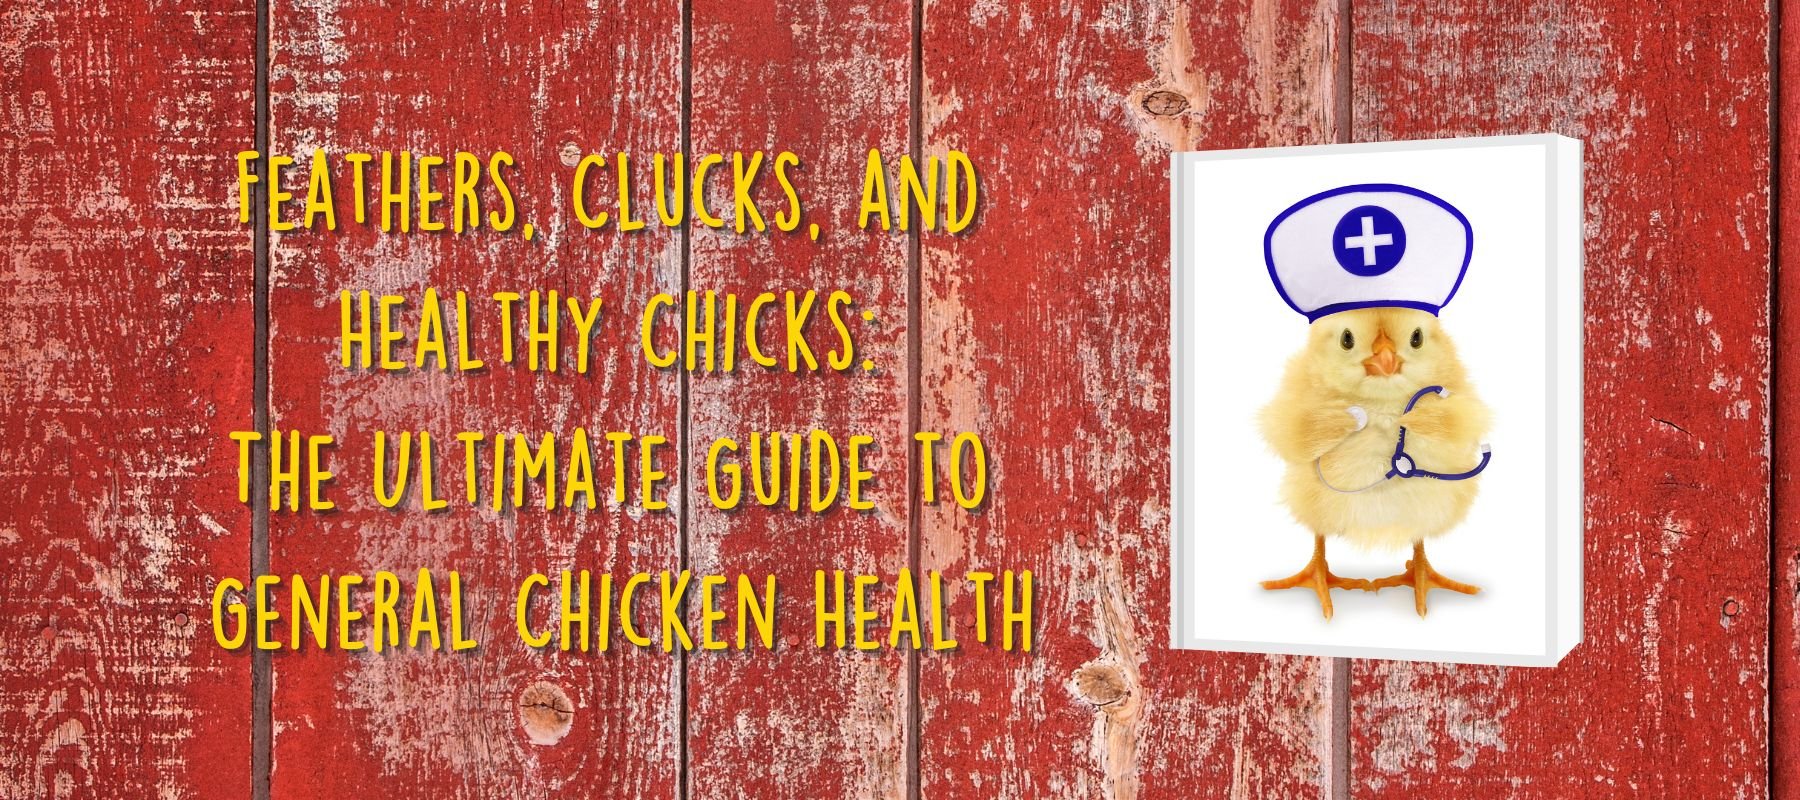 Feathers, Clucks, and Healthy Chicks: The Ultimate Guide to General Chicken Health - Cluck It All Farms